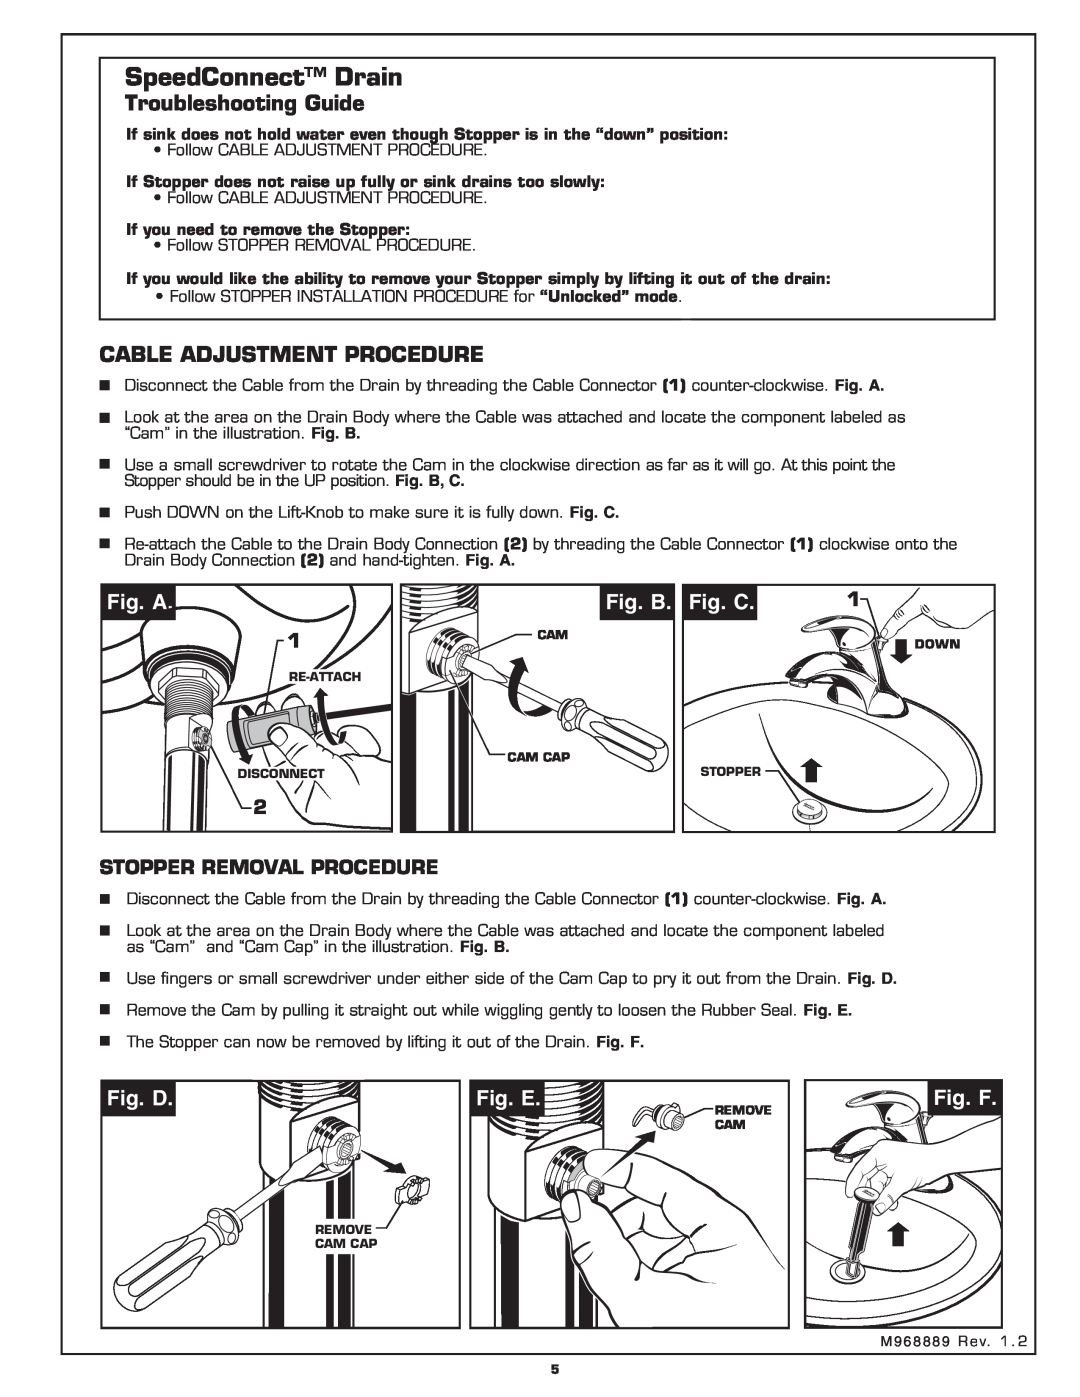 American Standard 7385.00X SpeedConnect Drain, Troubleshooting Guide, Cable Adjustment Procedure, Fig. A, Fig. B, Fig. C 